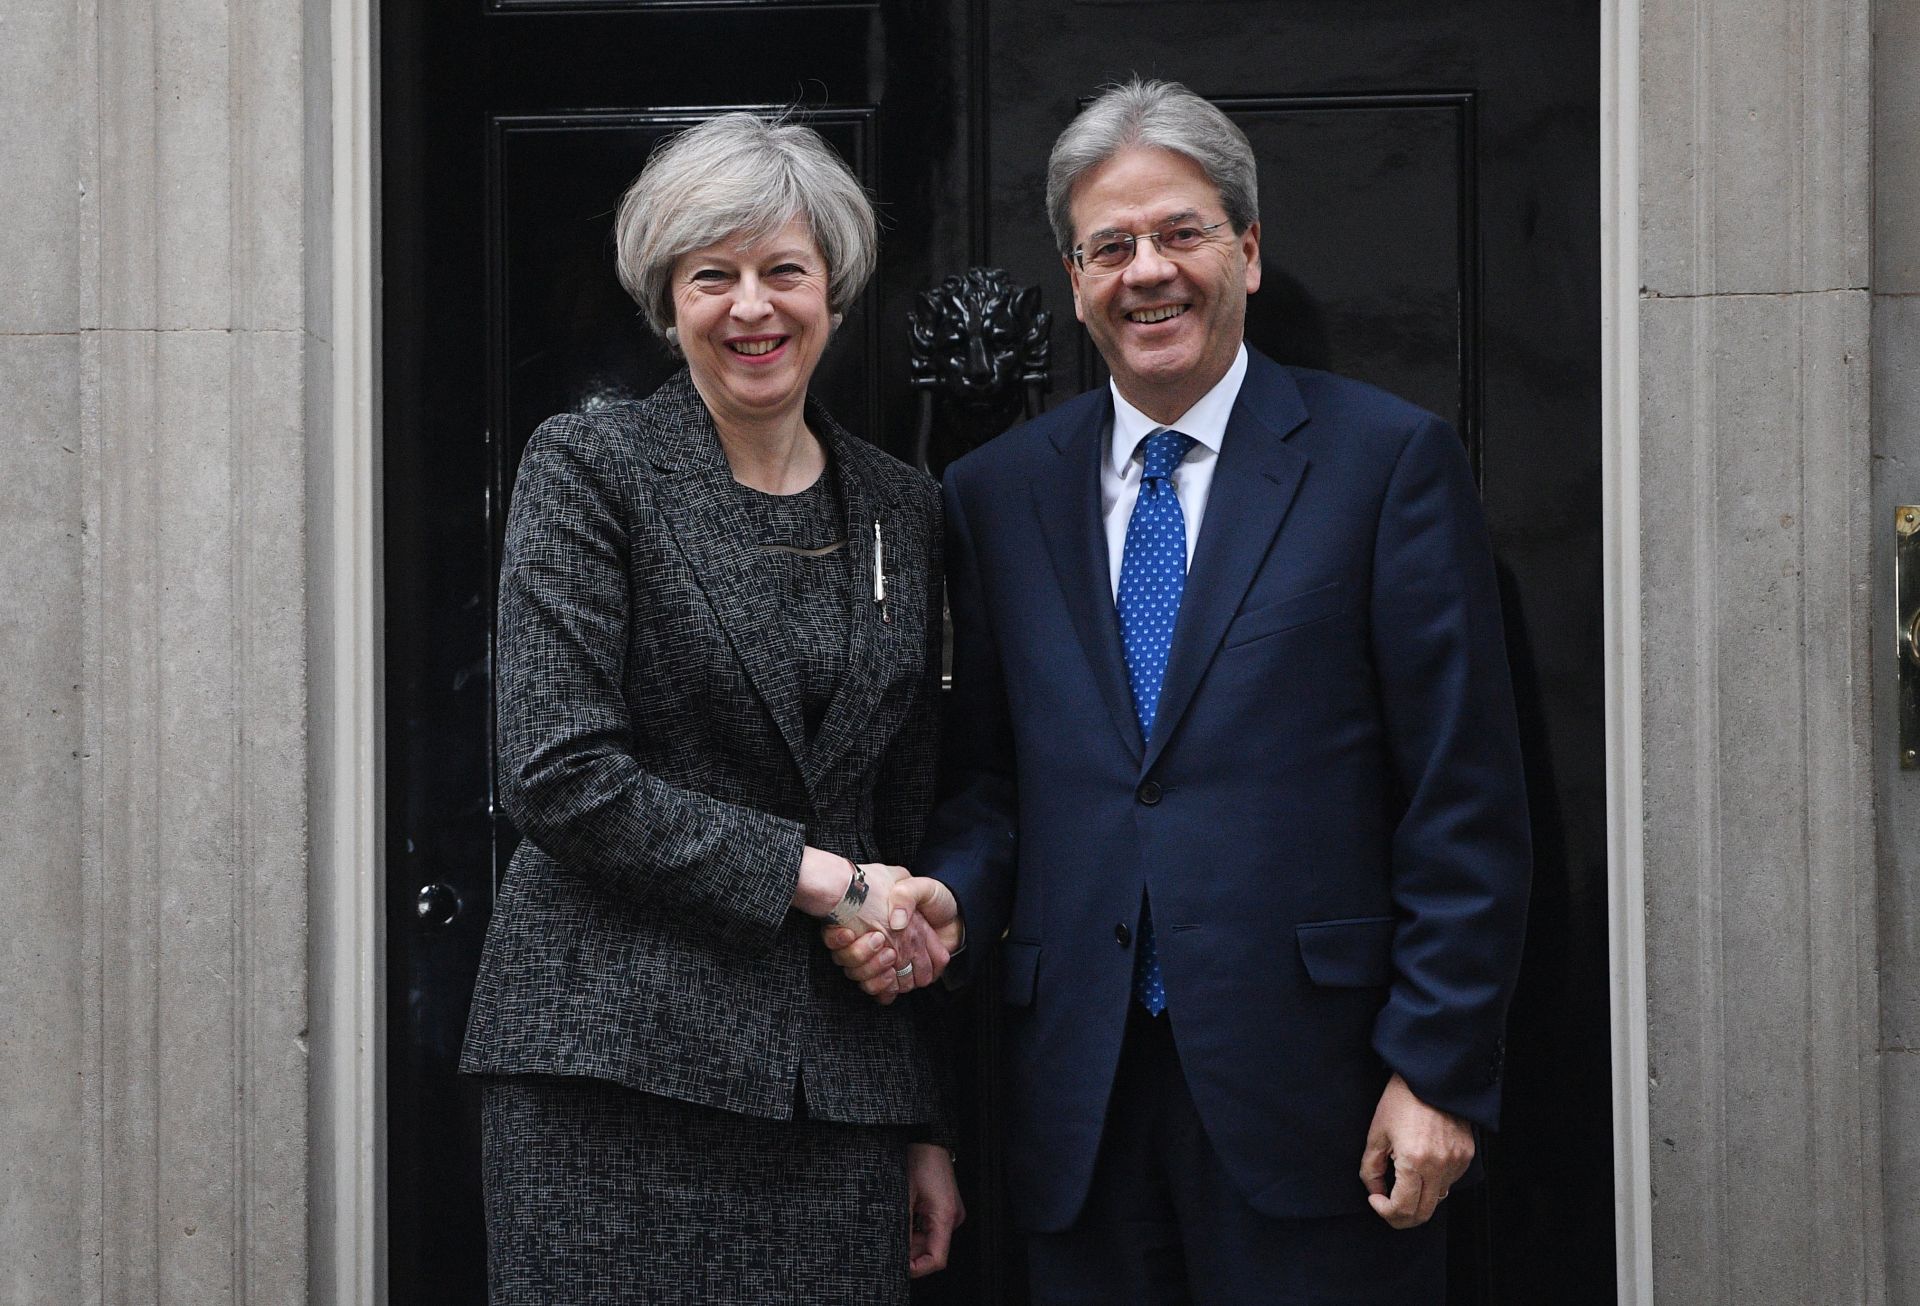 epa05780078 British Prime Minister, Theresa May (L) greets his Italian counterpart, Prime Minister of Italy, Paolo Gentiloni (R), in the steps of n10 Downing street in London, Britain, 09  February 2017.  EPA/FACUNDO ARRIZABALAGA